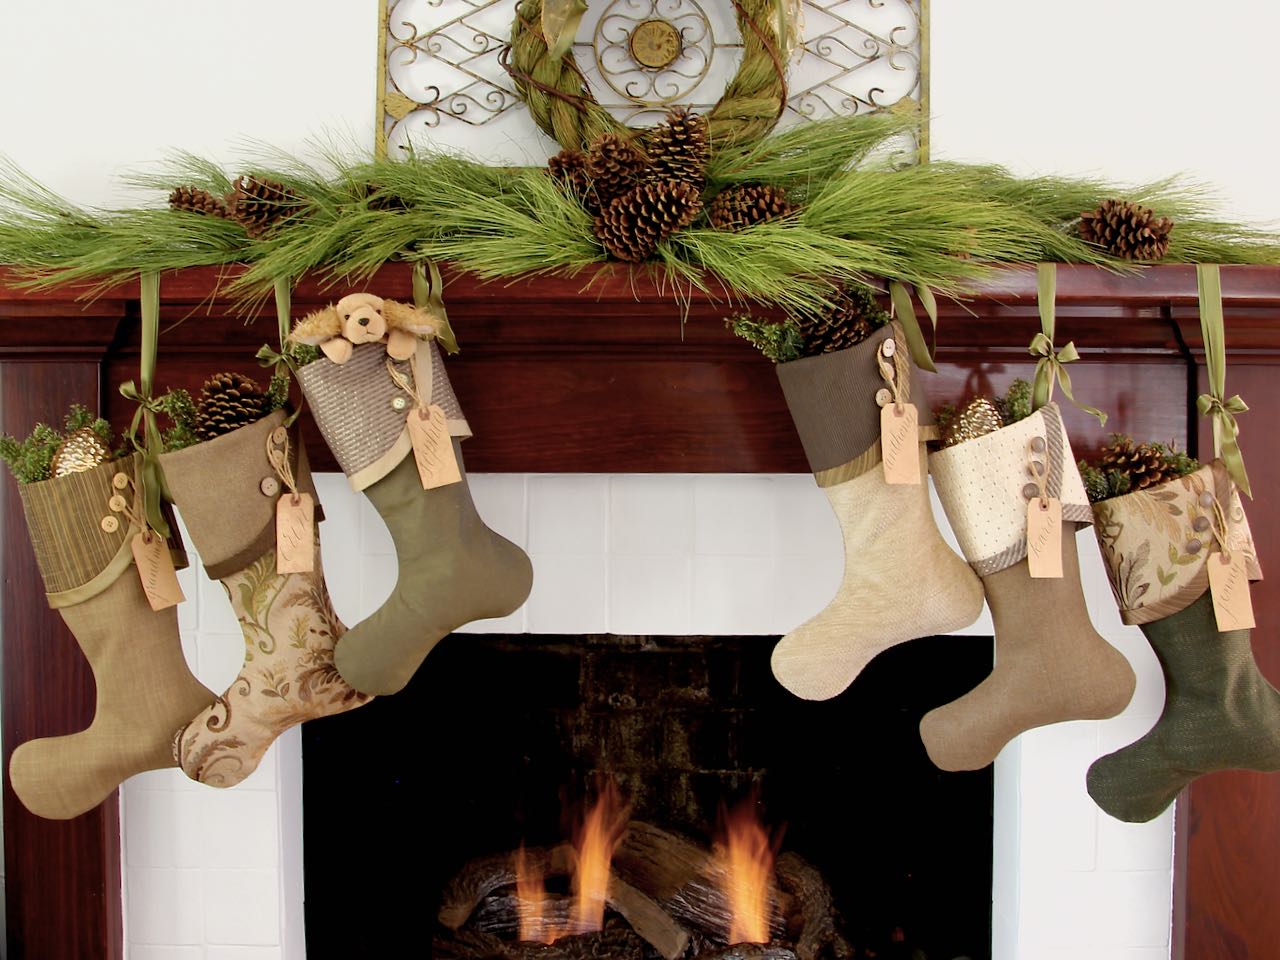 Stockings with custom name tags flanking a fireplace